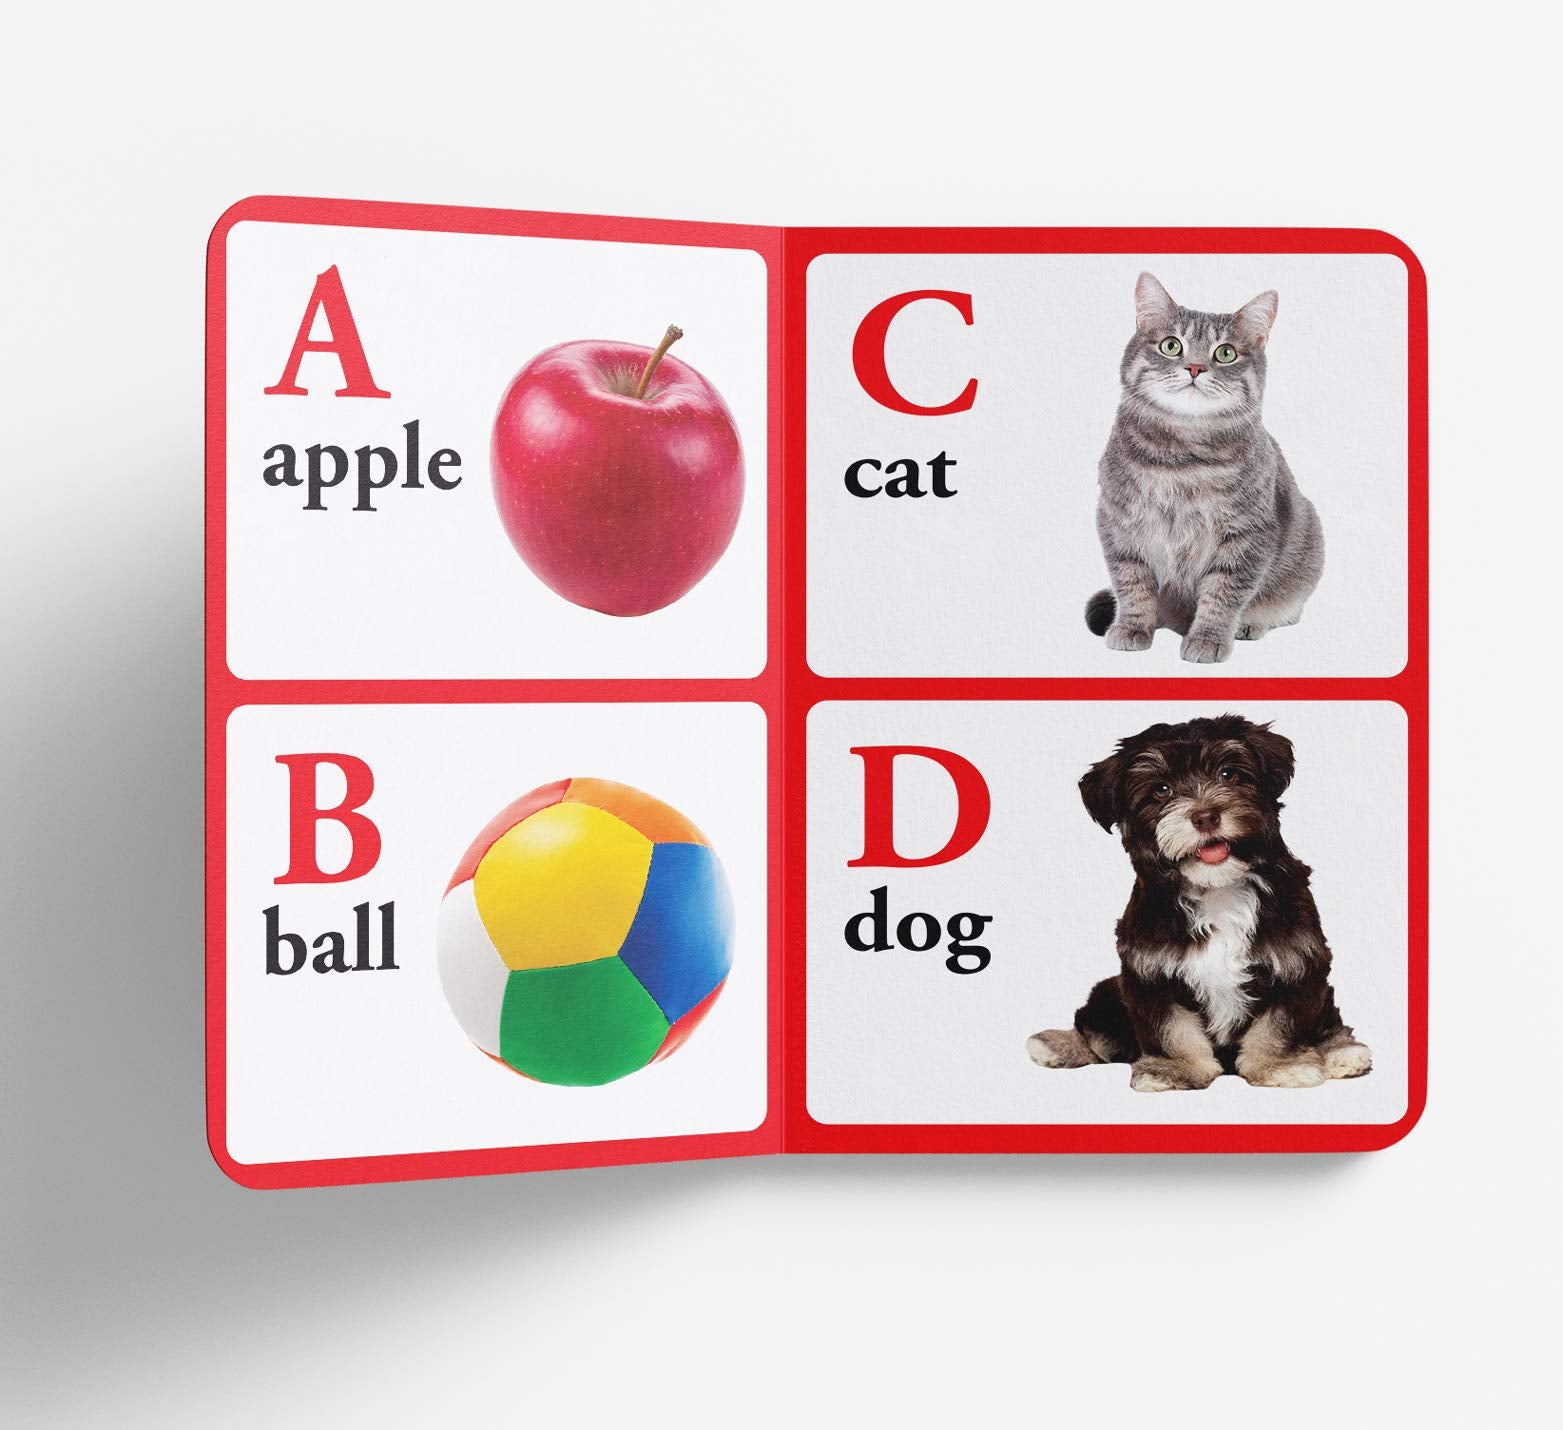 ABC - Early Learning Board Book With Large Font